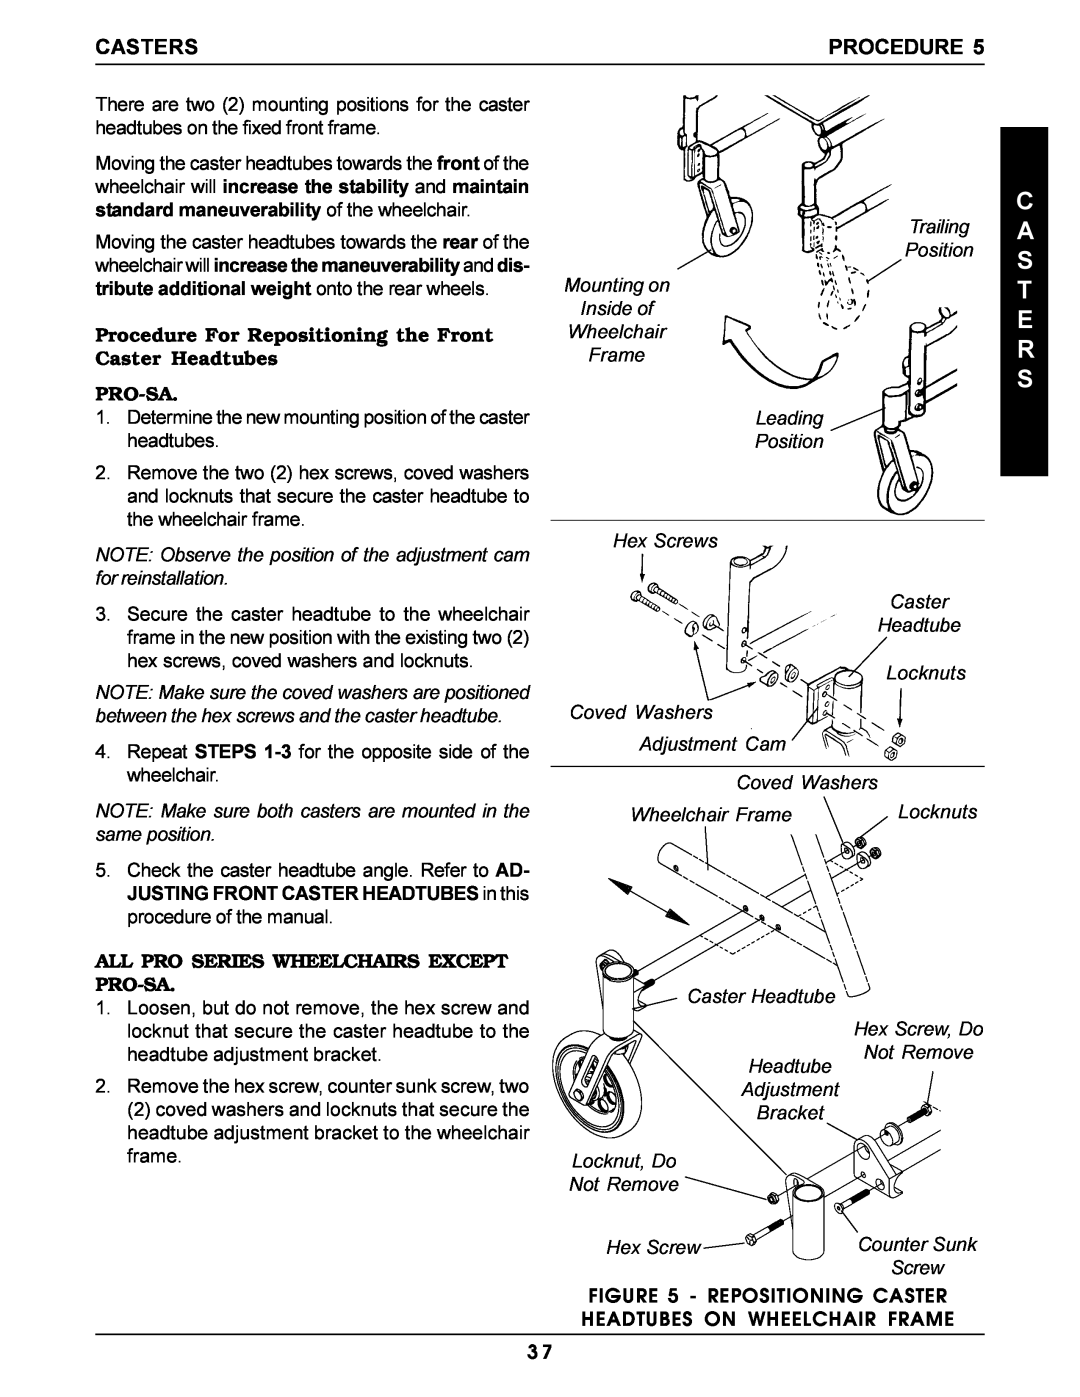 Invacare Pro Series manual Procedure For Repositioning the Front Caster Headtubes PRO-SA, C A S T E R S, Casters 